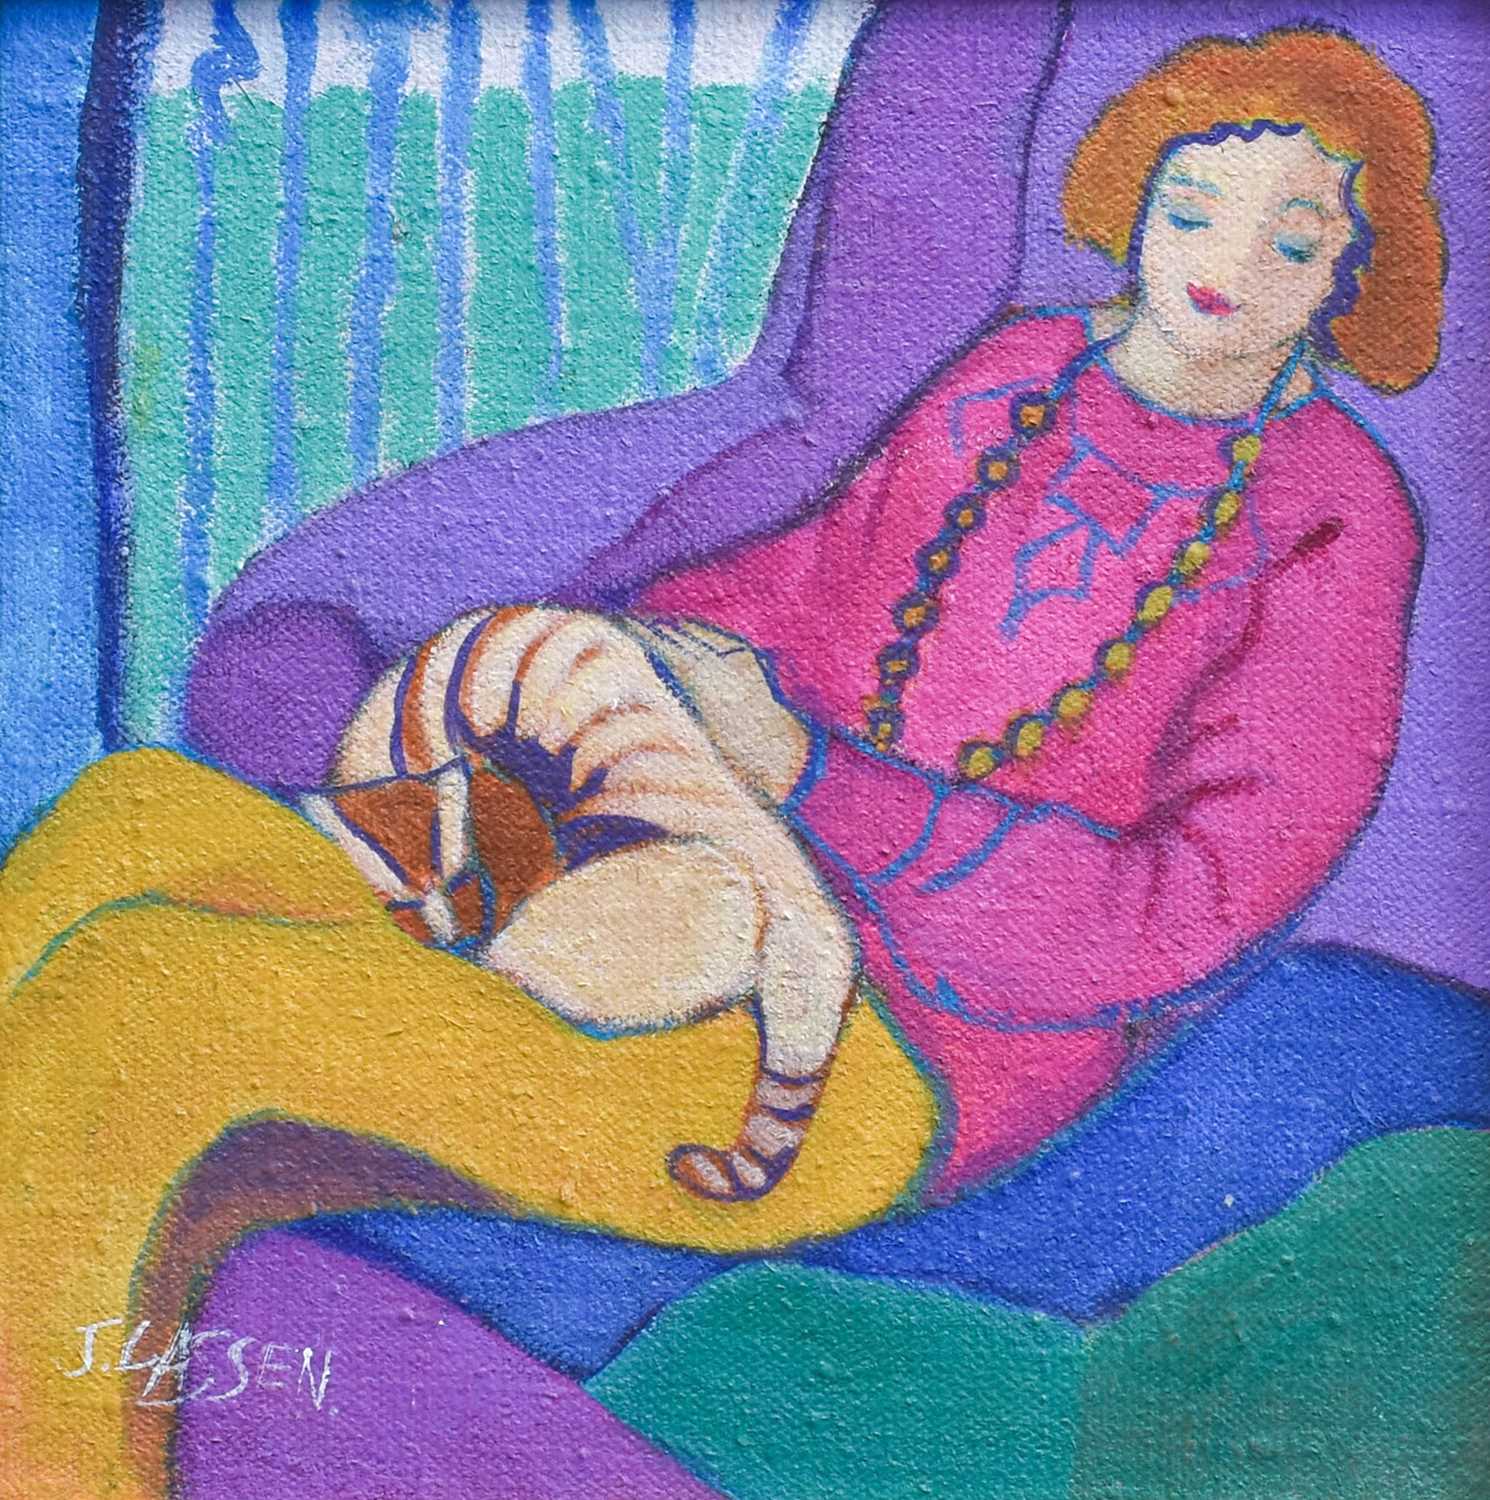 Jeanette Lasson (1924-2008) "Sleeping Partners" Signed, signed, inscribed and dated 1993 verso,